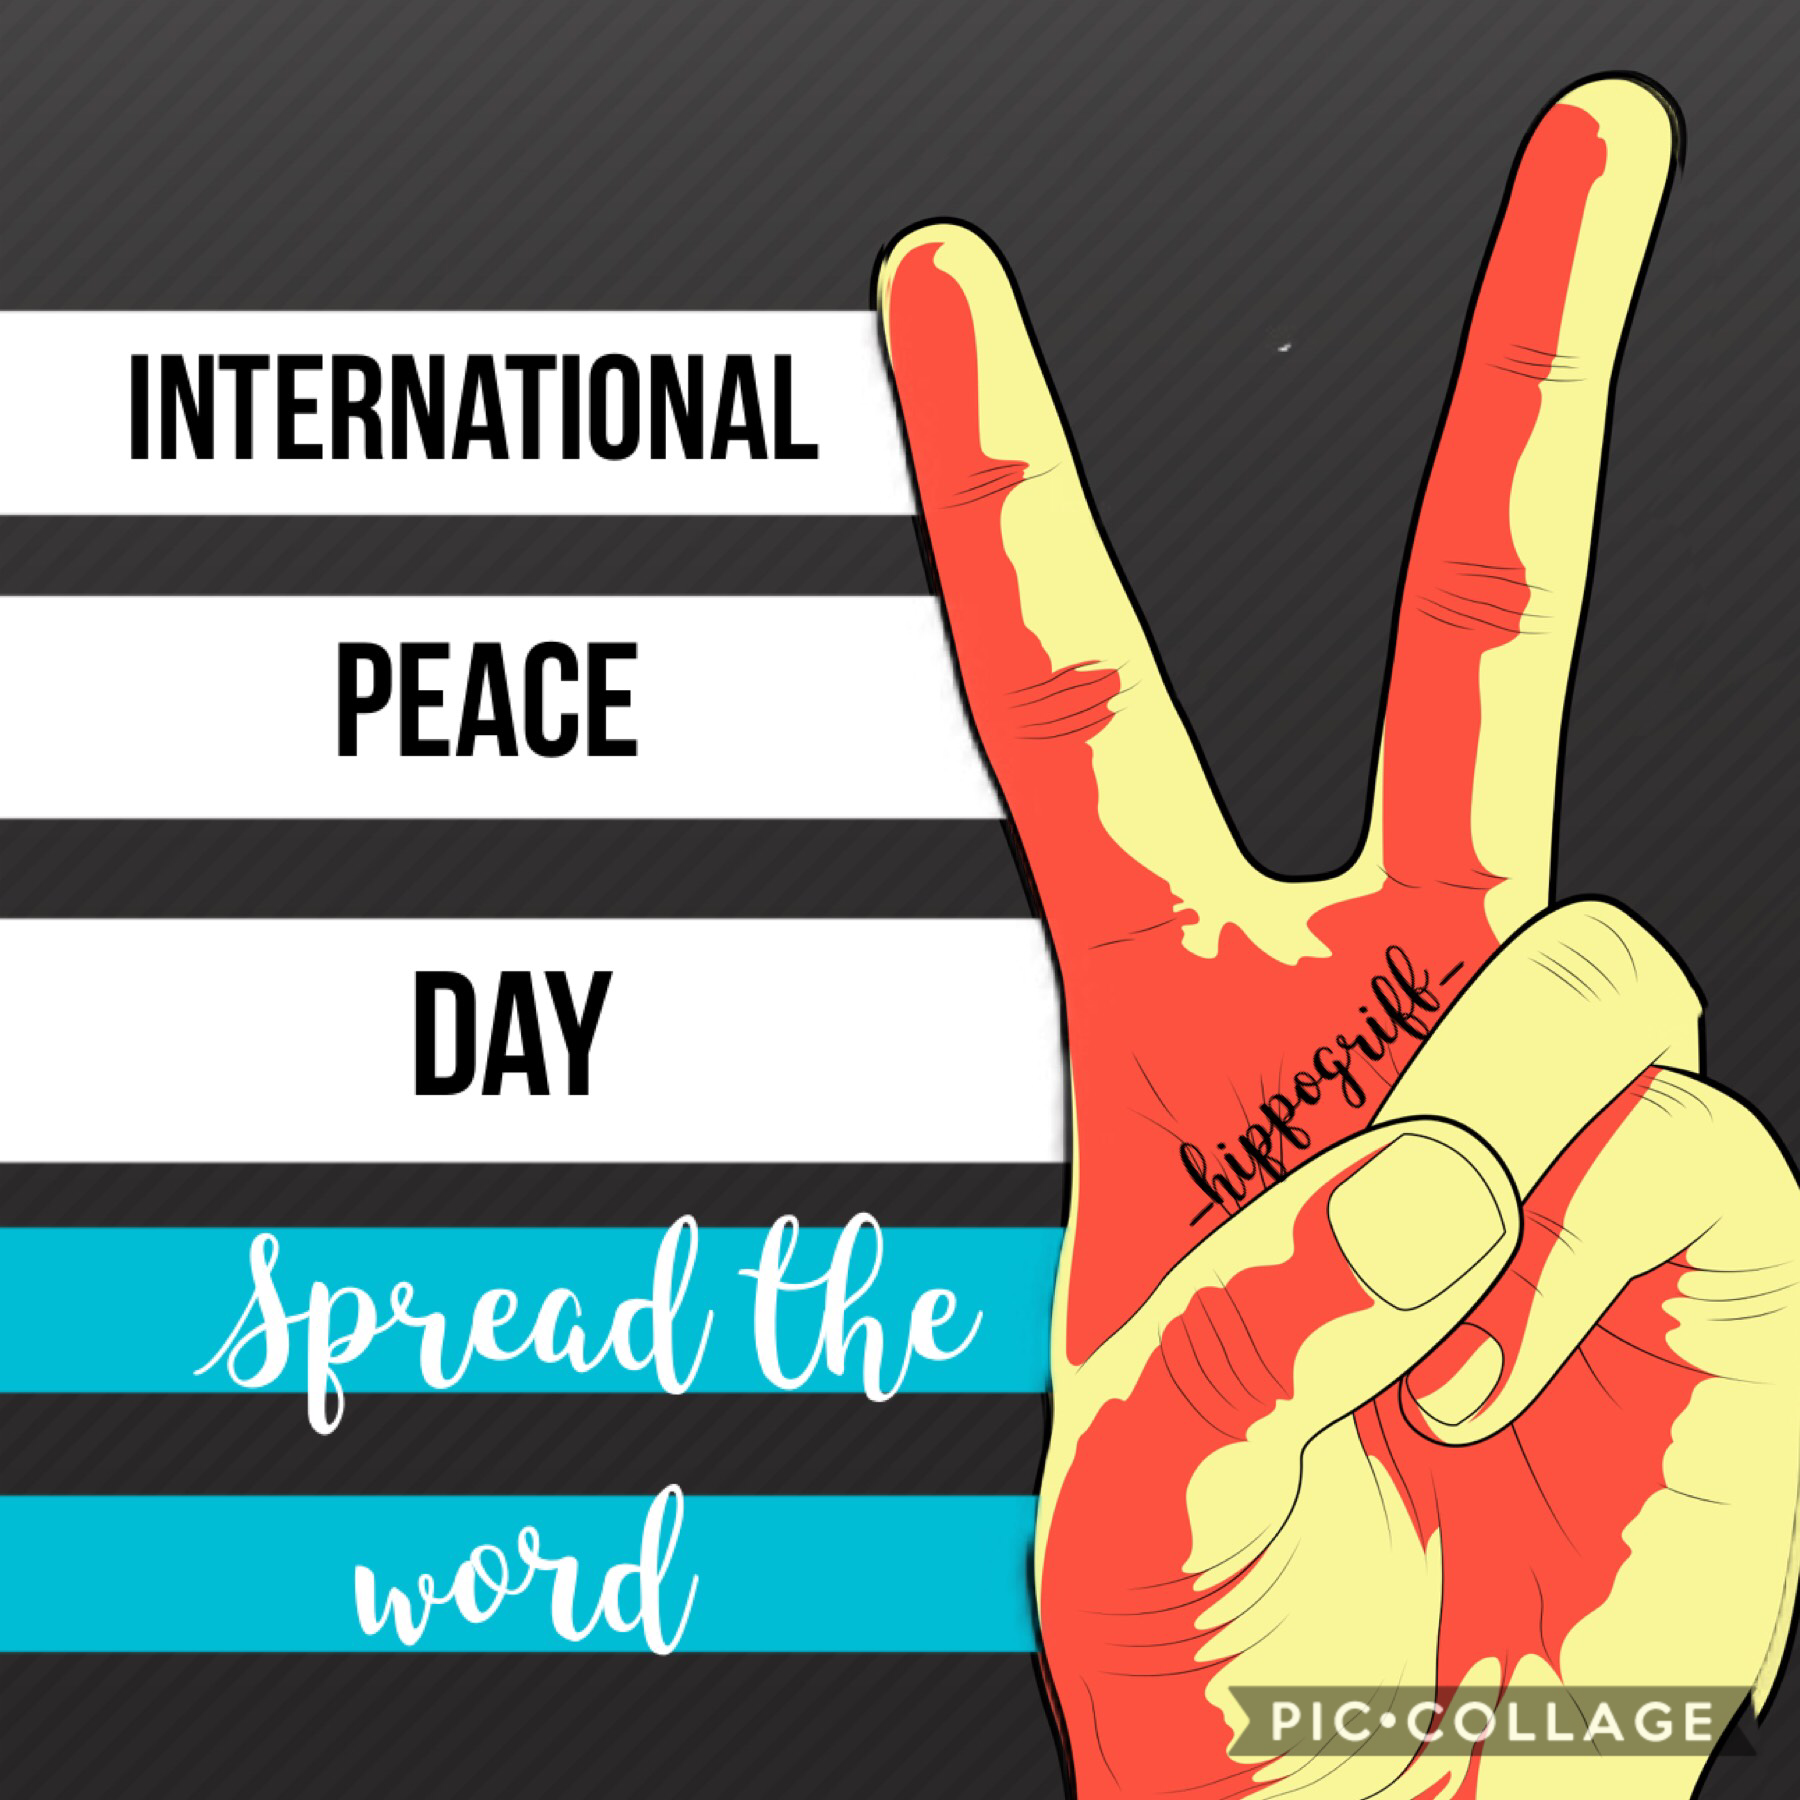 Yay!!! Spread some peace and love to this world and ur society!!!! 